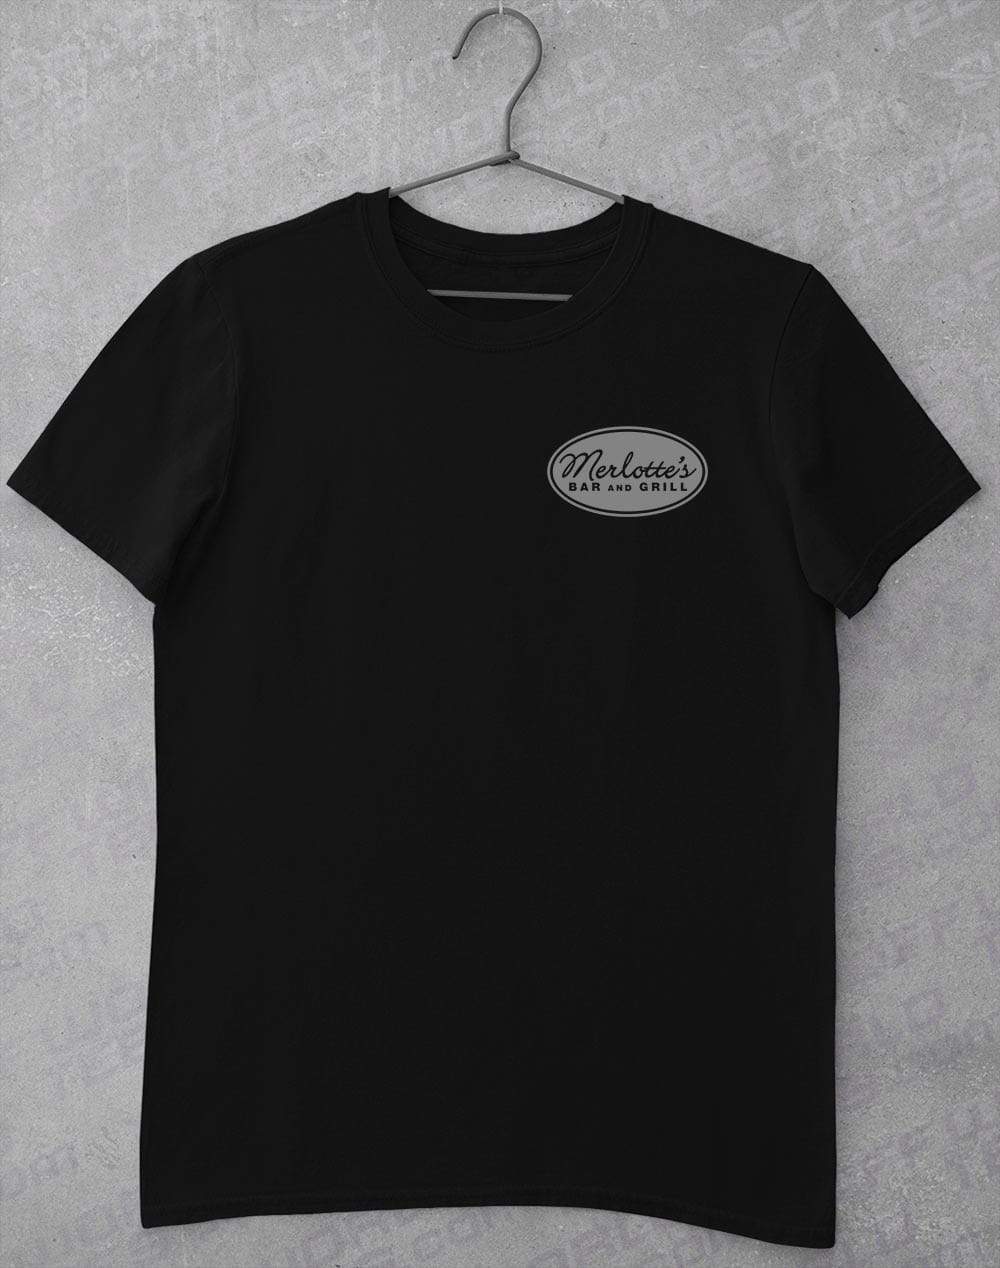 Merlotte's Bar and Grill T-Shirt (Men's Fit) S / Black  - Off World Tees